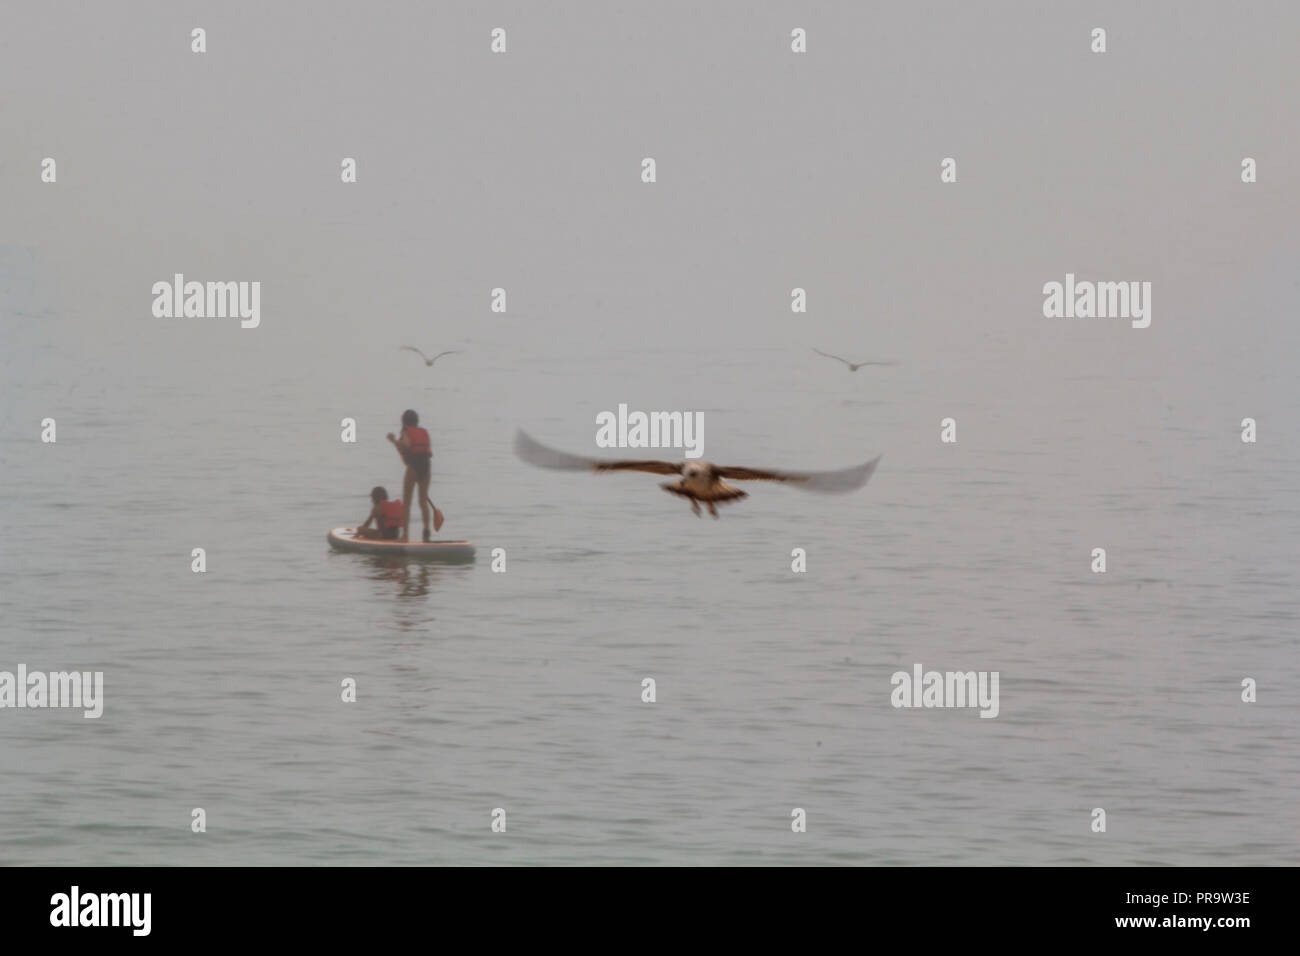 Paddle surf in the fog with seagulls flying around Stock Photo